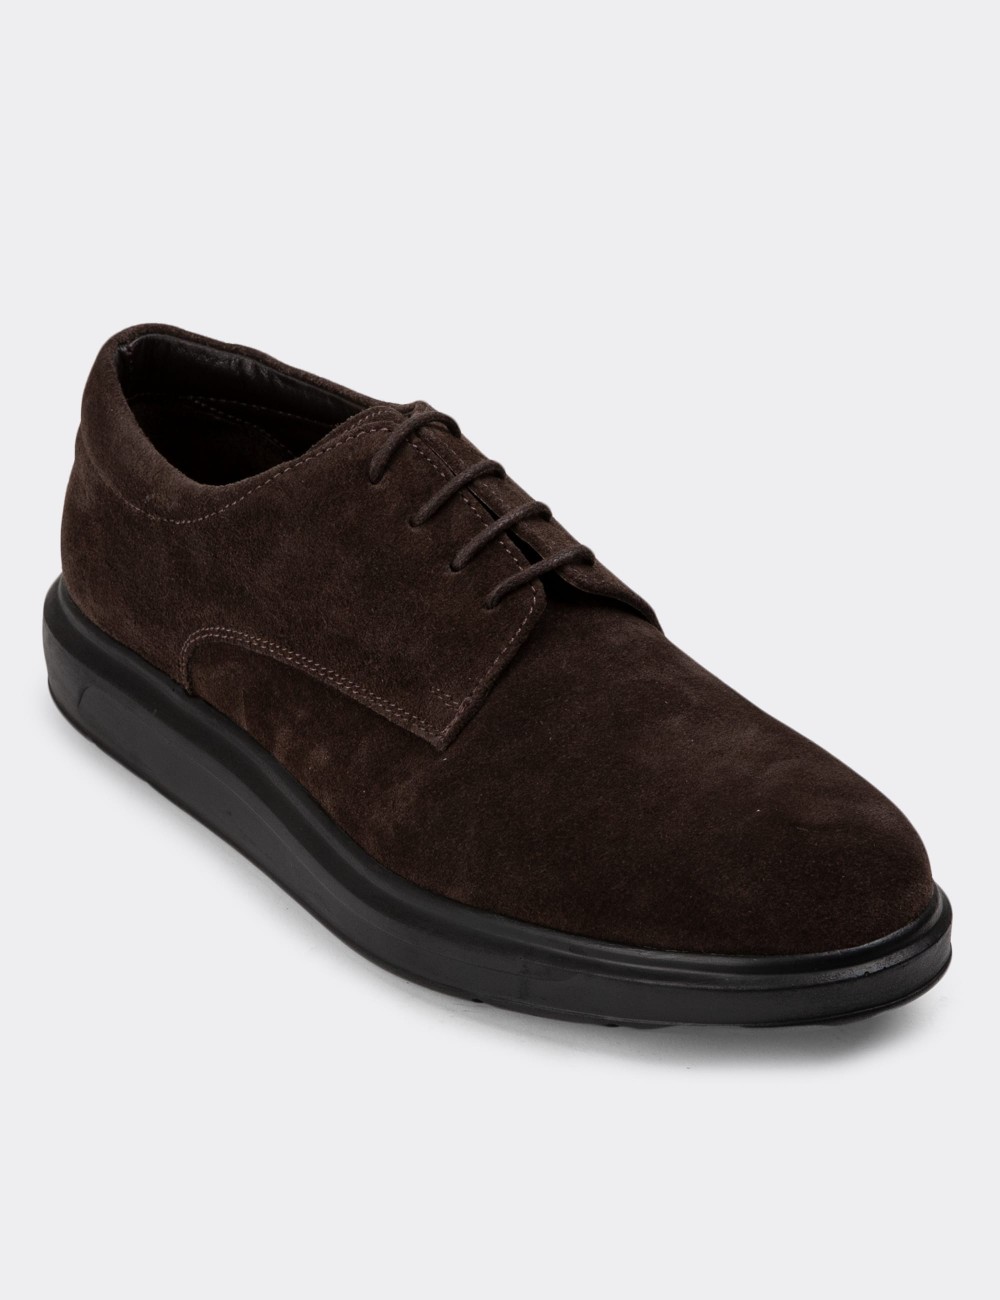 Brown Suede Leather Lace-up Shoes - 01934MKHVP02